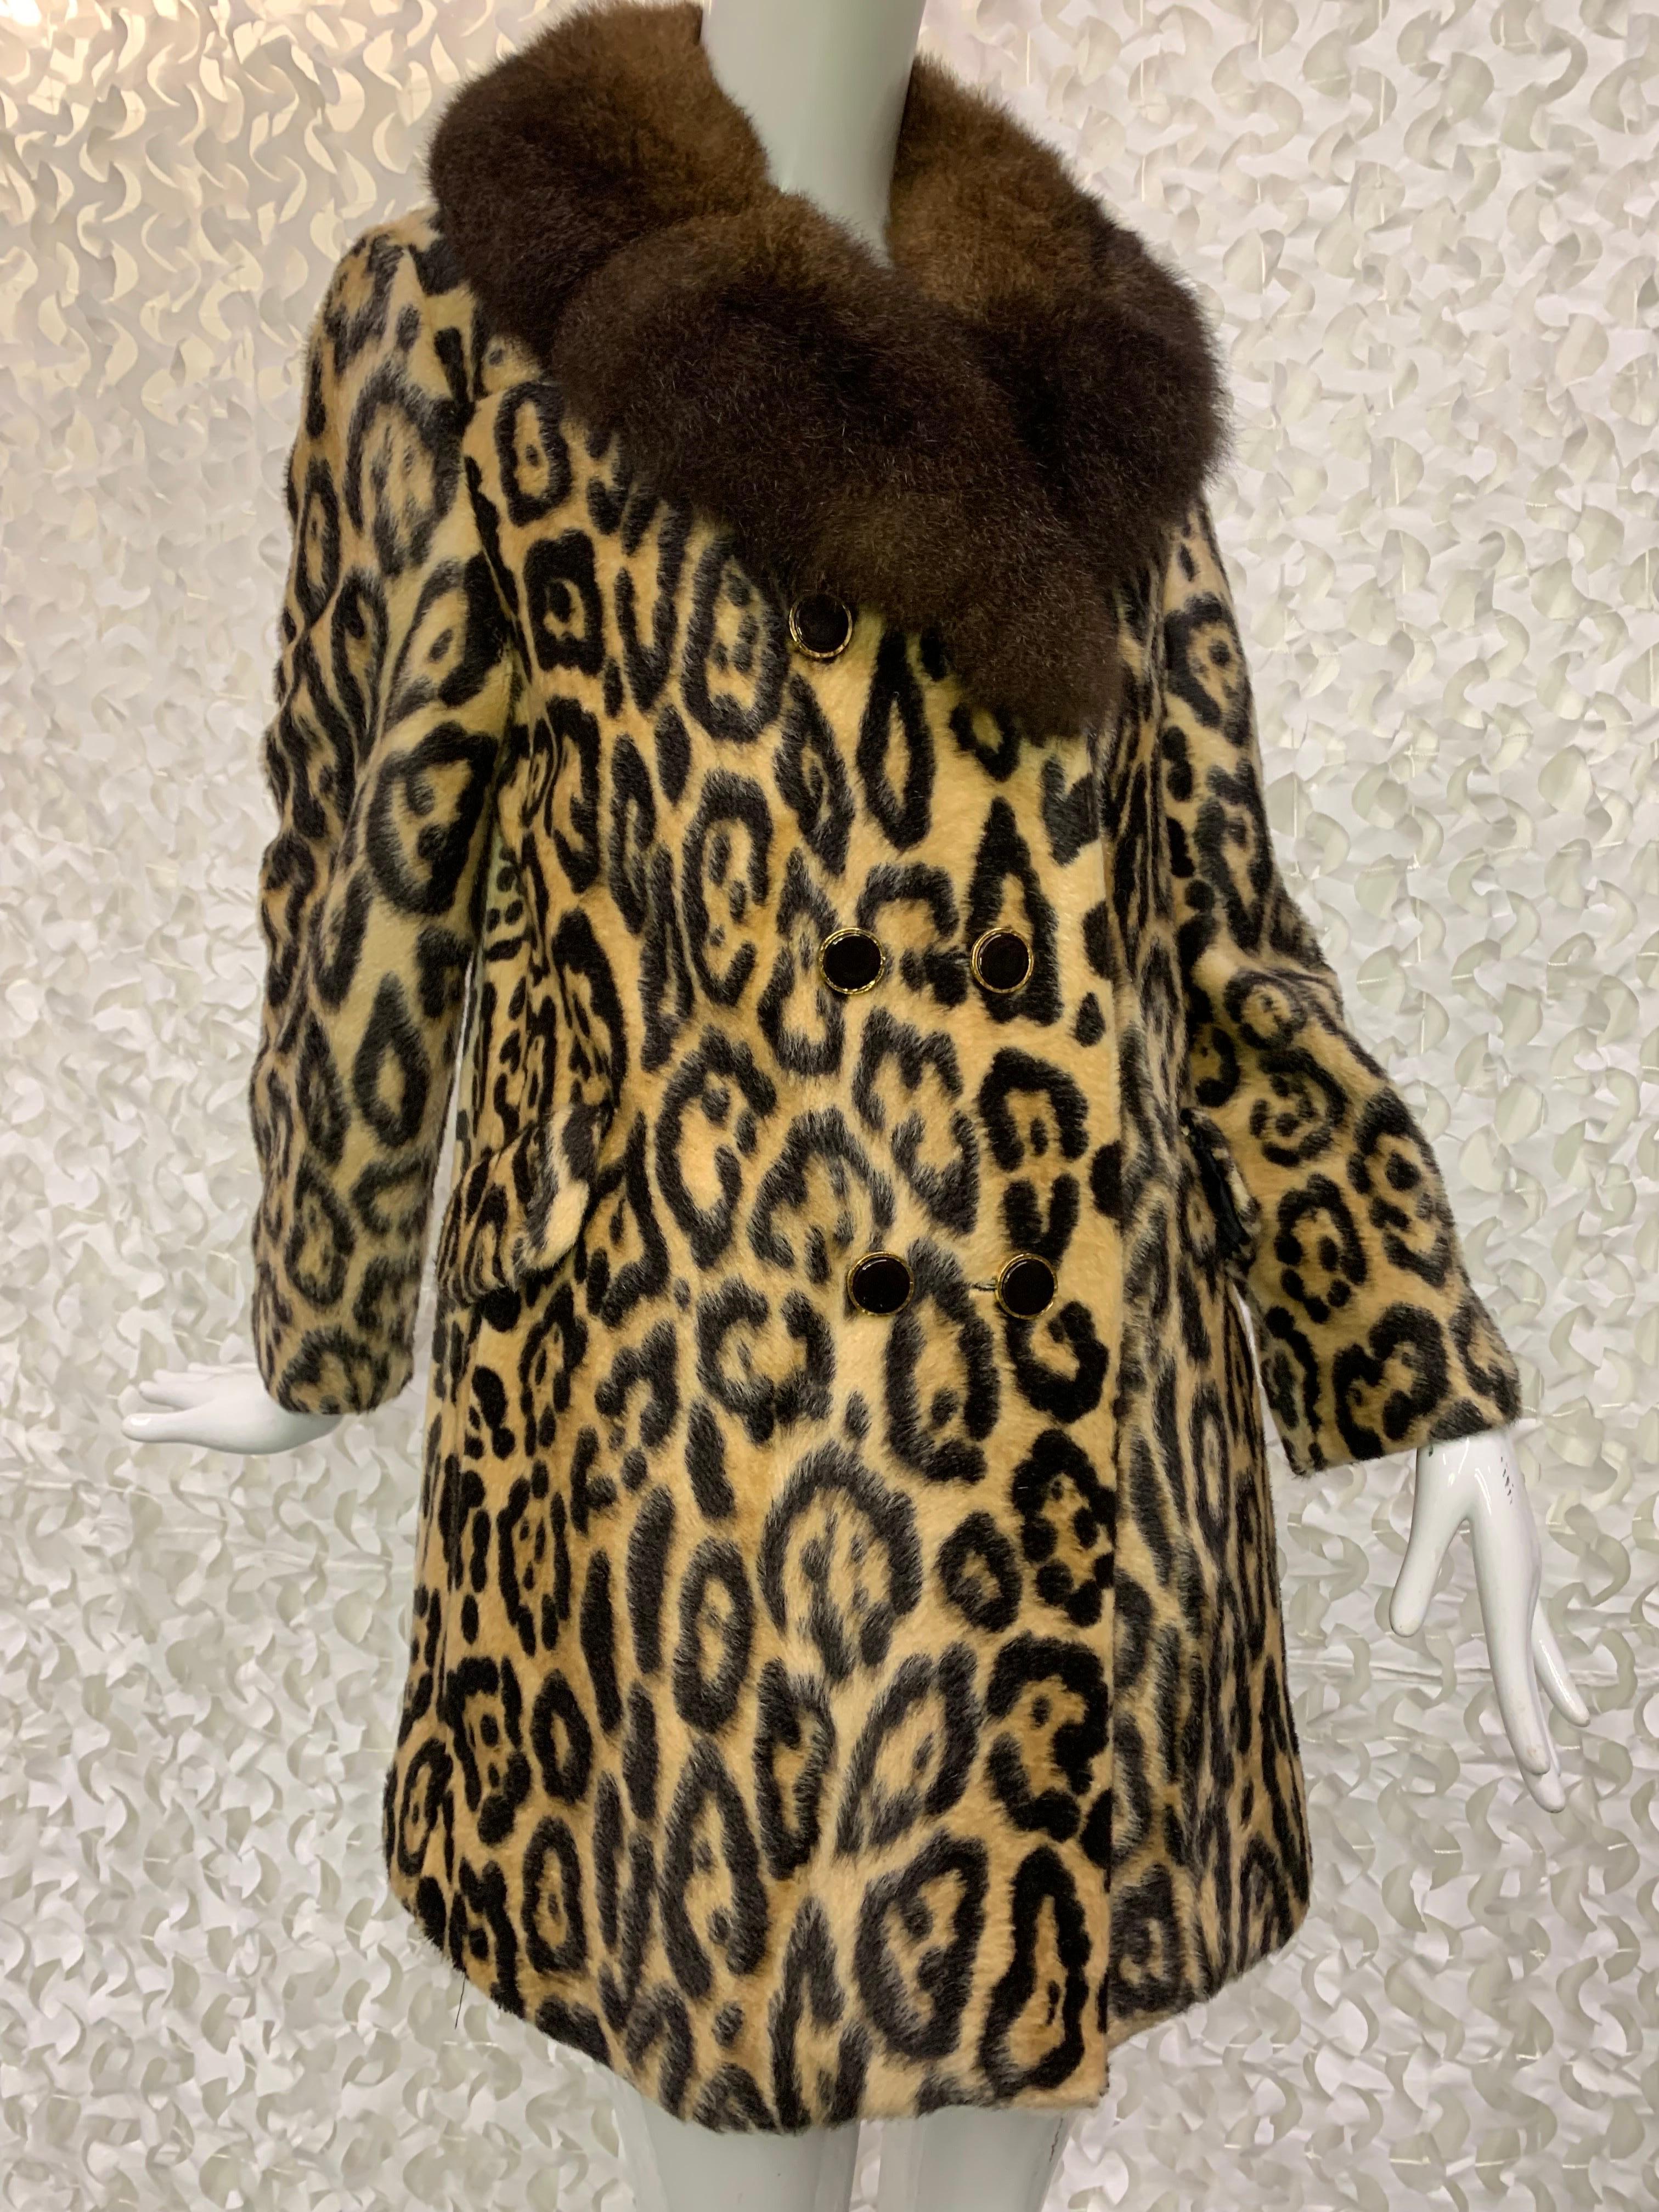 1960s Robert Meshekoff Faux Leopard Fur Double-Breasted Coat w Lush Fur Collar: Fingertip length casual coat with black and gold buttons and a plush possum fur notched collar. Fully lined in black satin.  Excellent condition. Fits up to US size 8. 